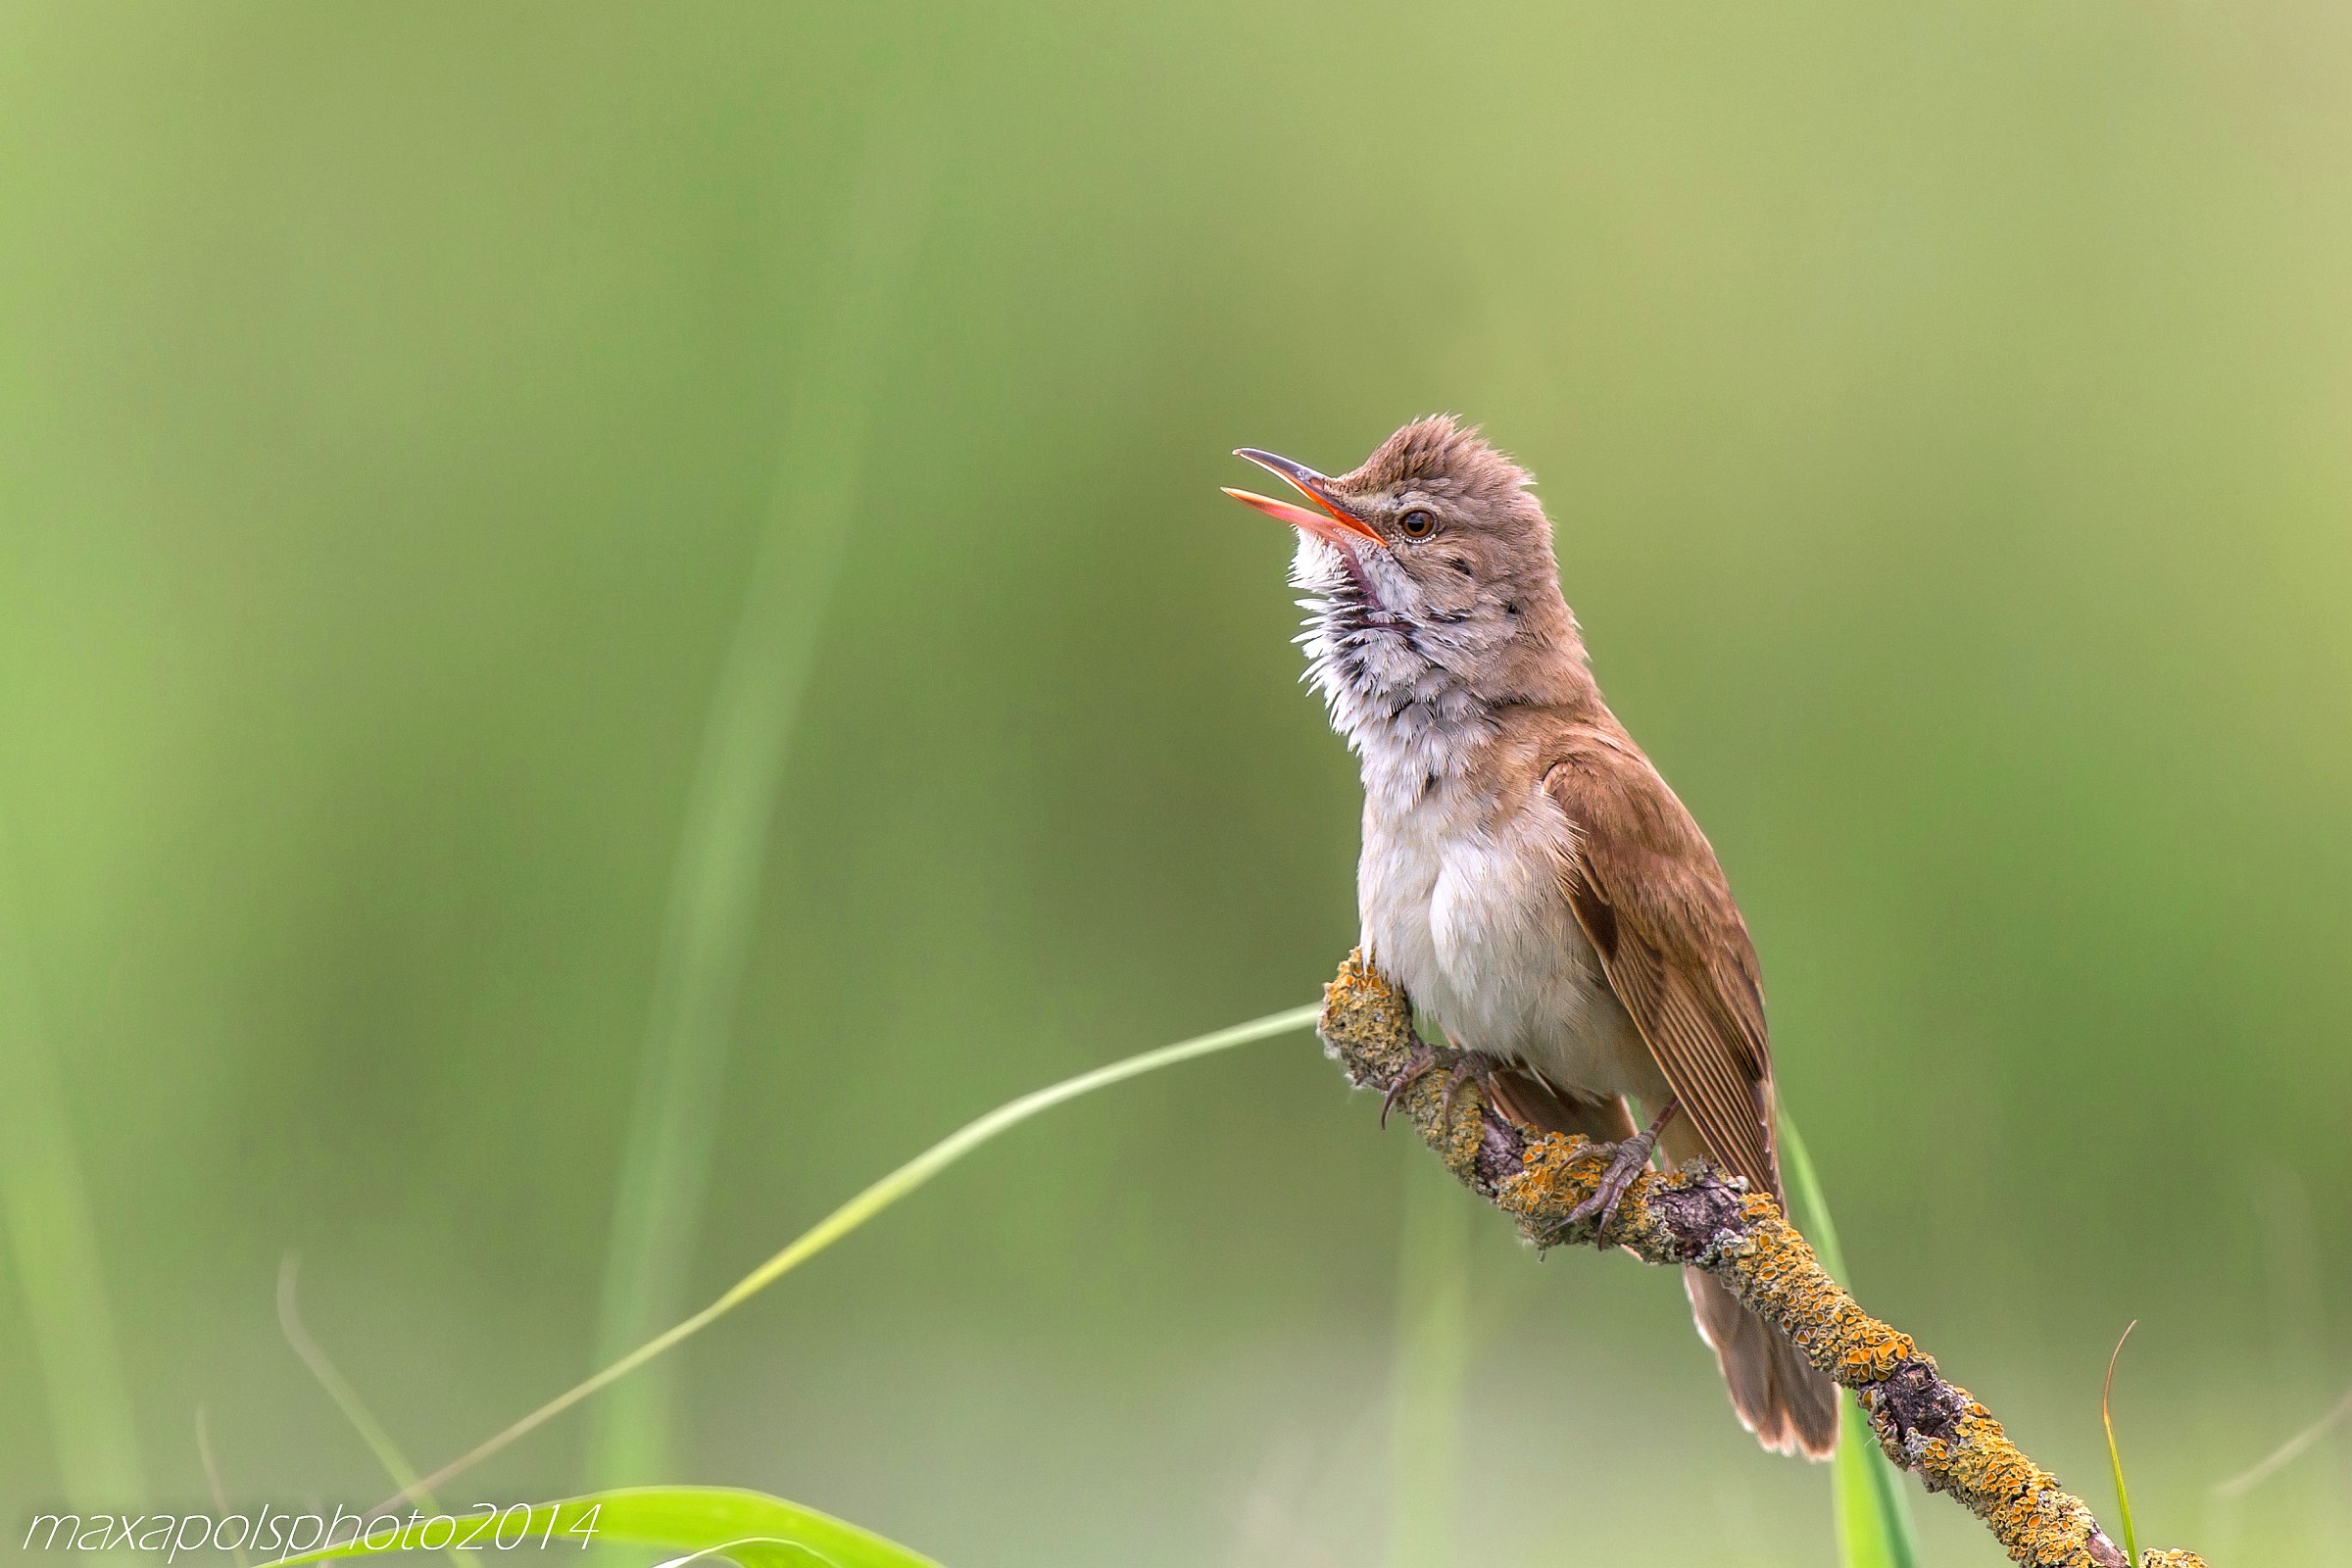 the song of the great reed warbler .....